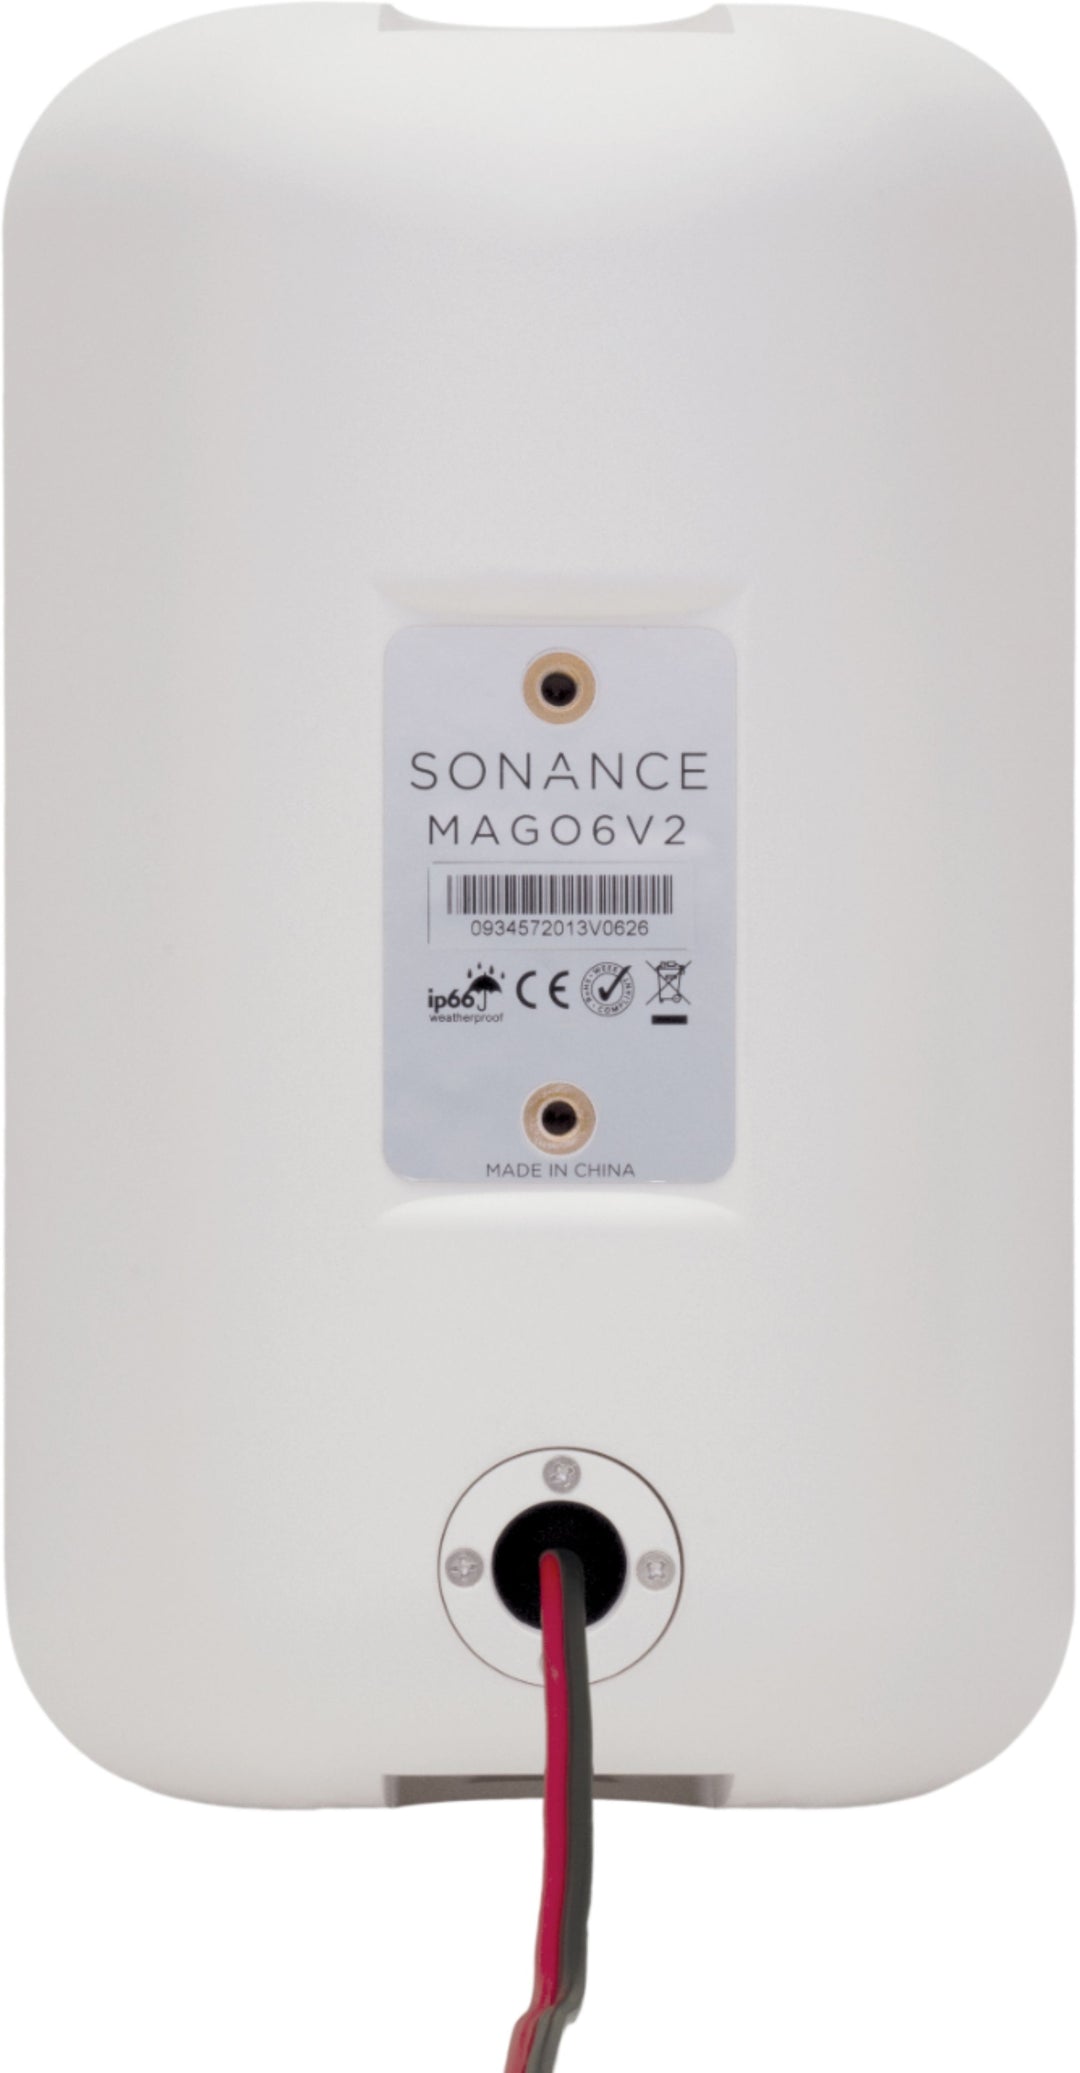 Sonance - MAG Series 2.0-Ch. Outdoor Streaming Music System Powered By Sonos® - Paintable White_3